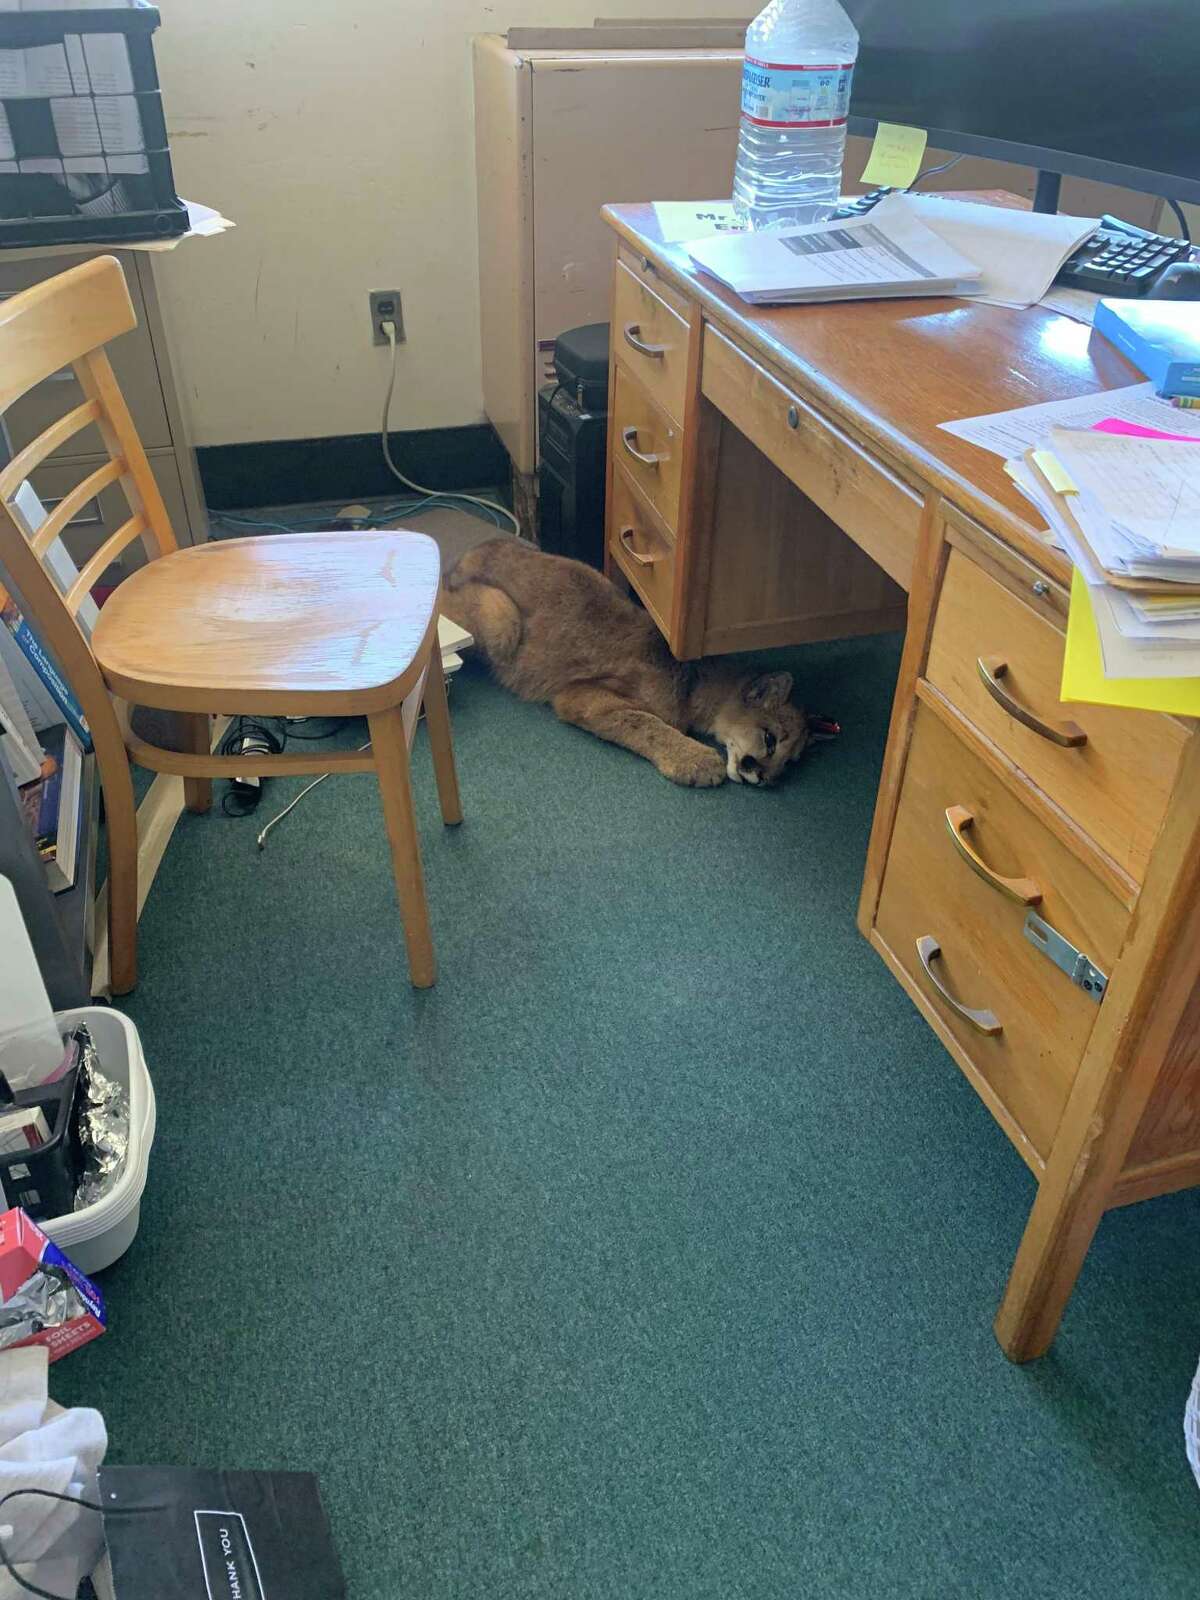 State wildlife officials and Oakland Zoo veterinarians treat a mountain lion cub that was trapped in a San Mateo County high school classroom Wednesday. The mountain lion is unlikely to survive in the wild on its own, so he will be placed at a zoo once he recovers, officials said.